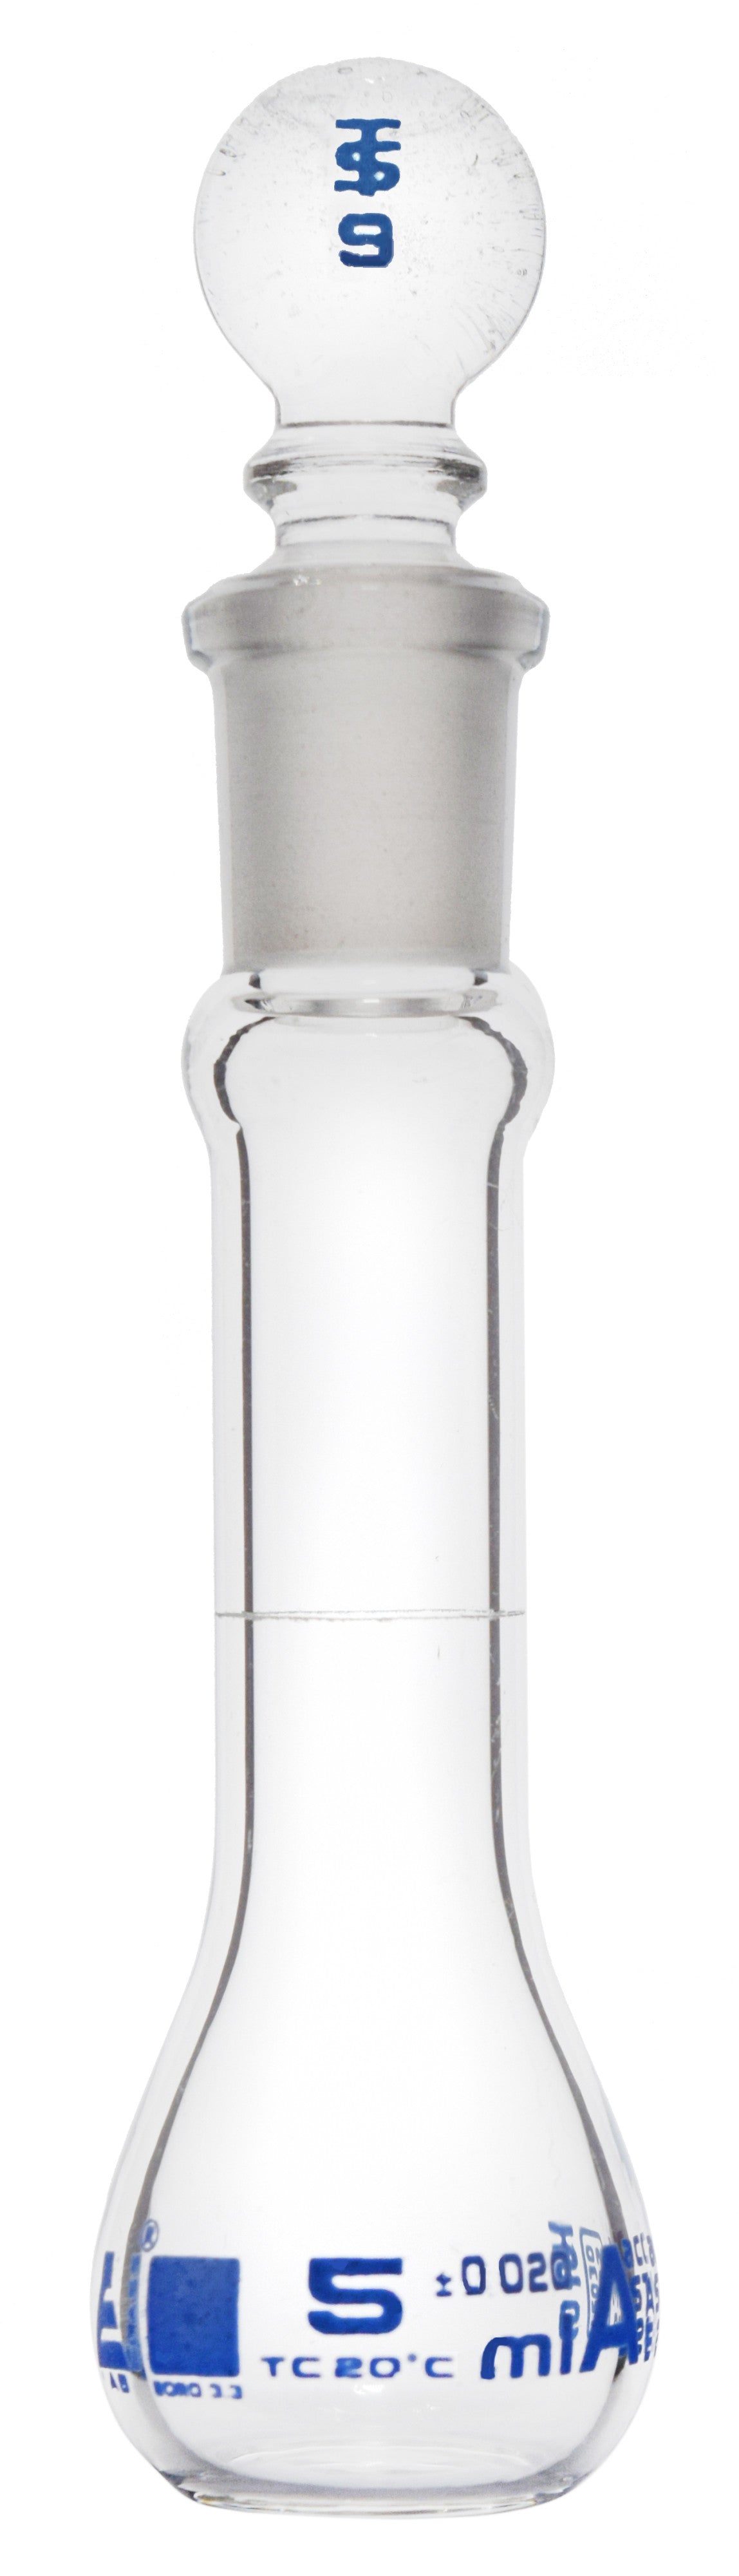 Borosilicate Glass ASTM Volumetric Flask with Glass Stopper, 5 ml, Class A, Autoclavable